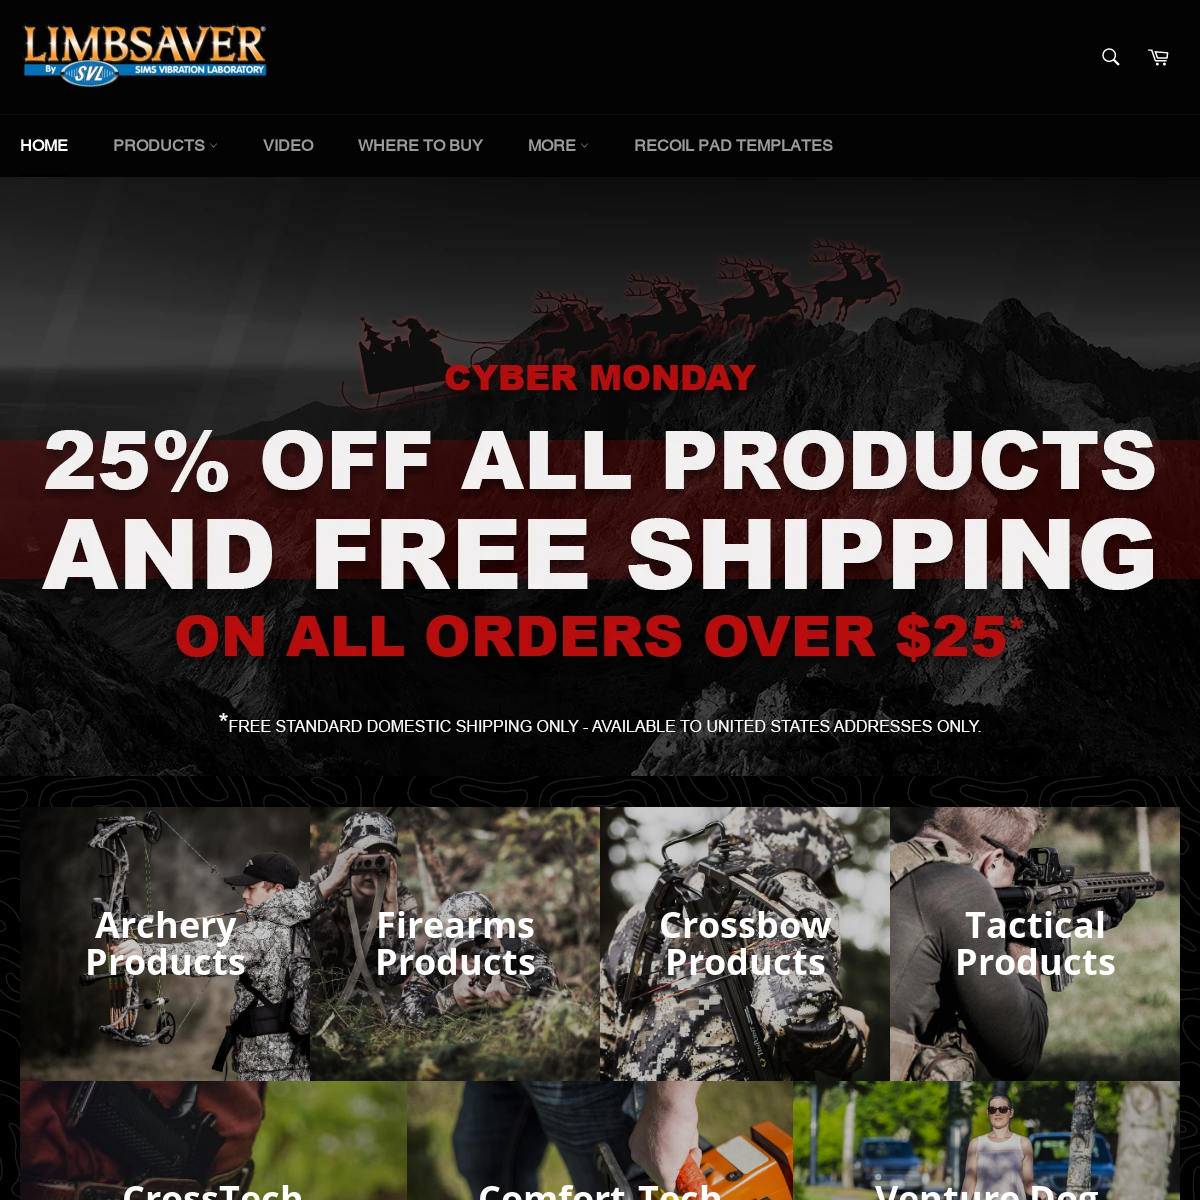 A complete backup of limbsaver.com